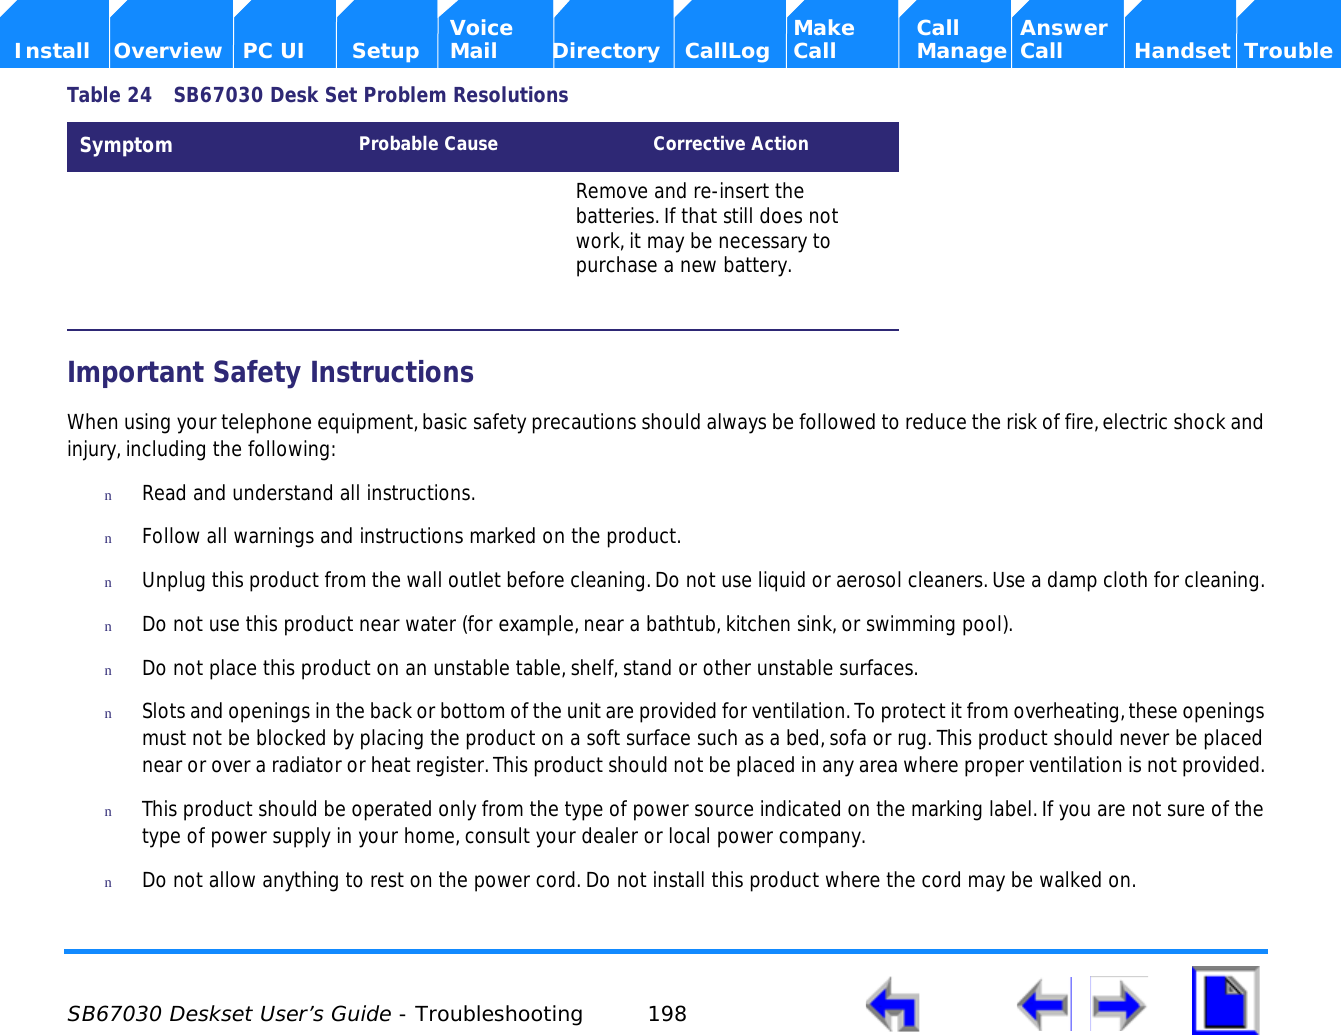  SB67030 Deskset User’s Guide - Troubleshooting 198    Voice Make Call Answer  Install Overview PC UI Setup Mail Directory CallLog Call Manage Call Handset TroubleImportant Safety InstructionsWhen using your telephone equipment, basic safety precautions should always be followed to reduce the risk of fire, electric shock and injury, including the following:nRead and understand all instructions. nFollow all warnings and instructions marked on the product.nUnplug this product from the wall outlet before cleaning. Do not use liquid or aerosol cleaners. Use a damp cloth for cleaning. nDo not use this product near water (for example, near a bathtub, kitchen sink, or swimming pool).nDo not place this product on an unstable table, shelf, stand or other unstable surfaces.nSlots and openings in the back or bottom of the unit are provided for ventilation. To protect it from overheating, these openings must not be blocked by placing the product on a soft surface such as a bed, sofa or rug. This product should never be placed near or over a radiator or heat register. This product should not be placed in any area where proper ventilation is not provided. nThis product should be operated only from the type of power source indicated on the marking label. If you are not sure of the type of power supply in your home, consult your dealer or local power company. nDo not allow anything to rest on the power cord. Do not install this product where the cord may be walked on. Remove and re-insert the batteries. If that still does not work, it may be necessary to purchase a new battery.Table 24  SB67030 Desk Set Problem ResolutionsSymptom Probable Cause Corrective Action